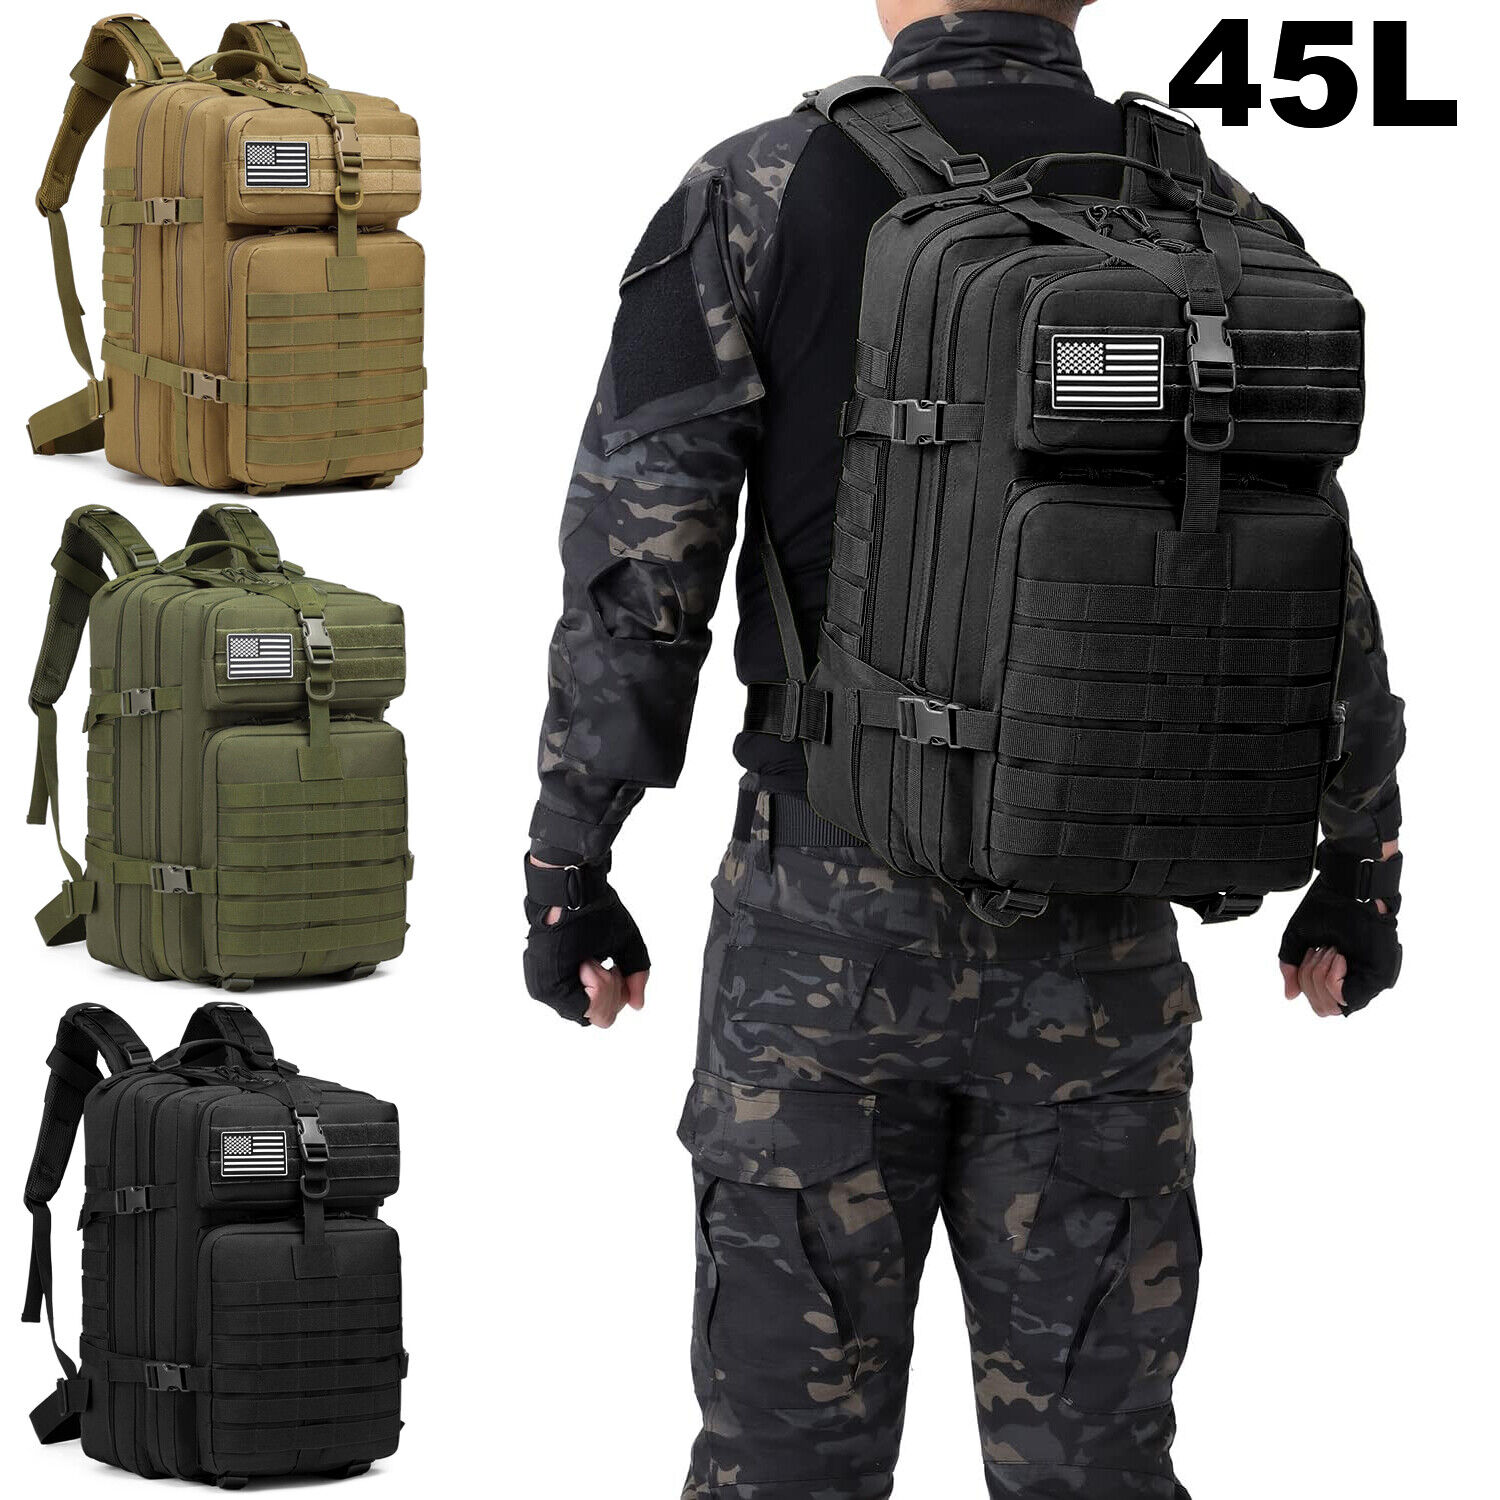 Military Tactical Backpack Bag Army Molle Bug Out Rucksack Travel Hiking Camping